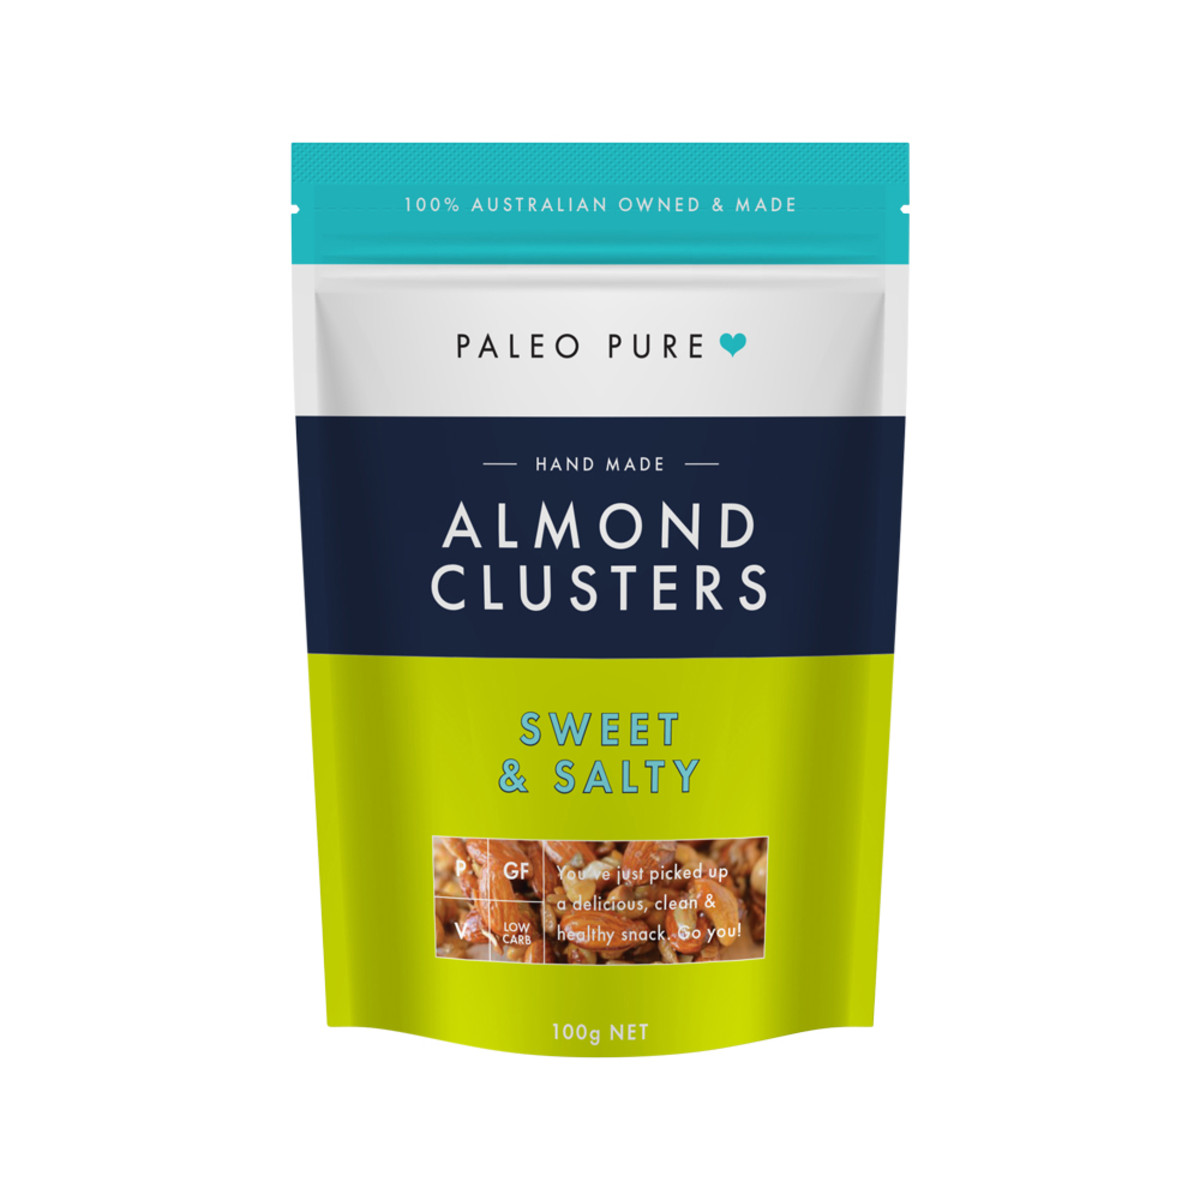 PALEO PURE - Almond Clusters Sweet & Salty